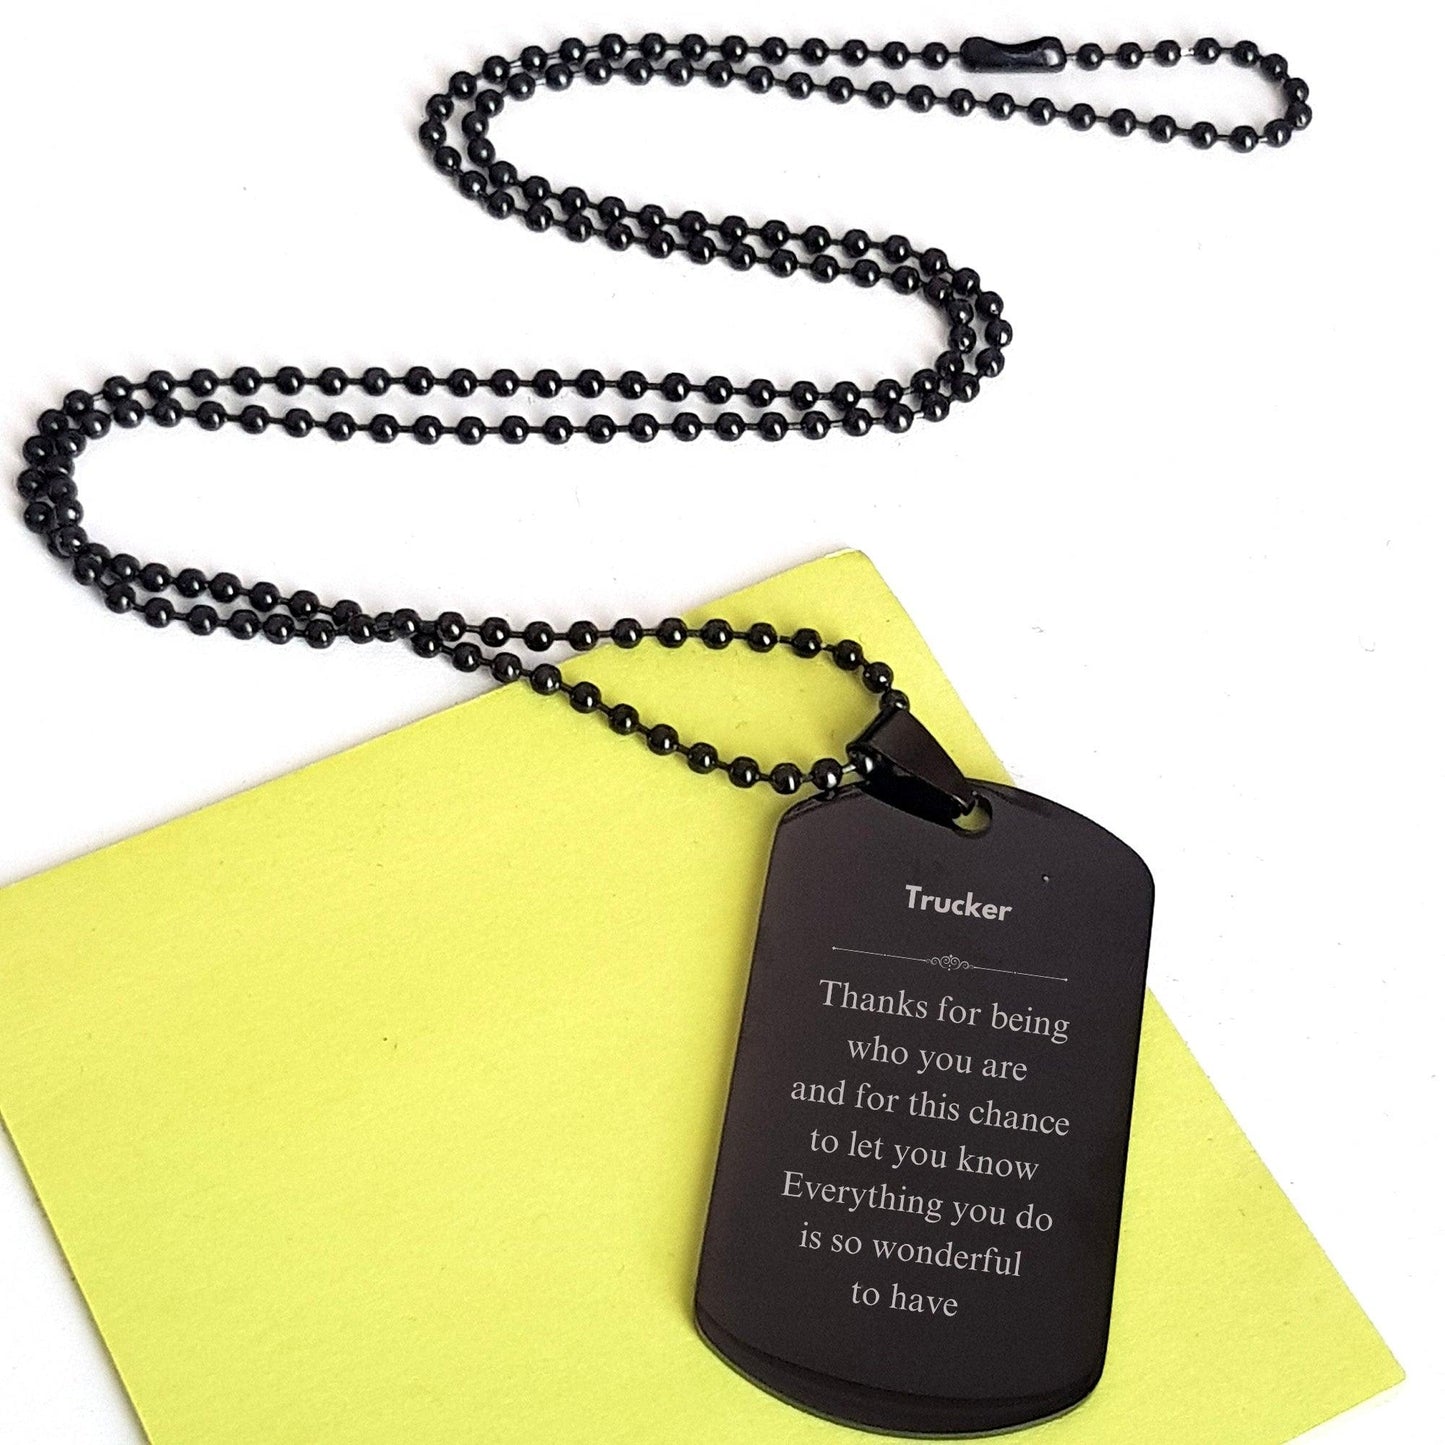 Heartfelt Soulmate Engraved Black Dog Tag Necklace - Life is Learning to Dance in the Rain, I'm always with you - Birthday, Christmas Holiday Gifts - Mallard Moon Gift Shop